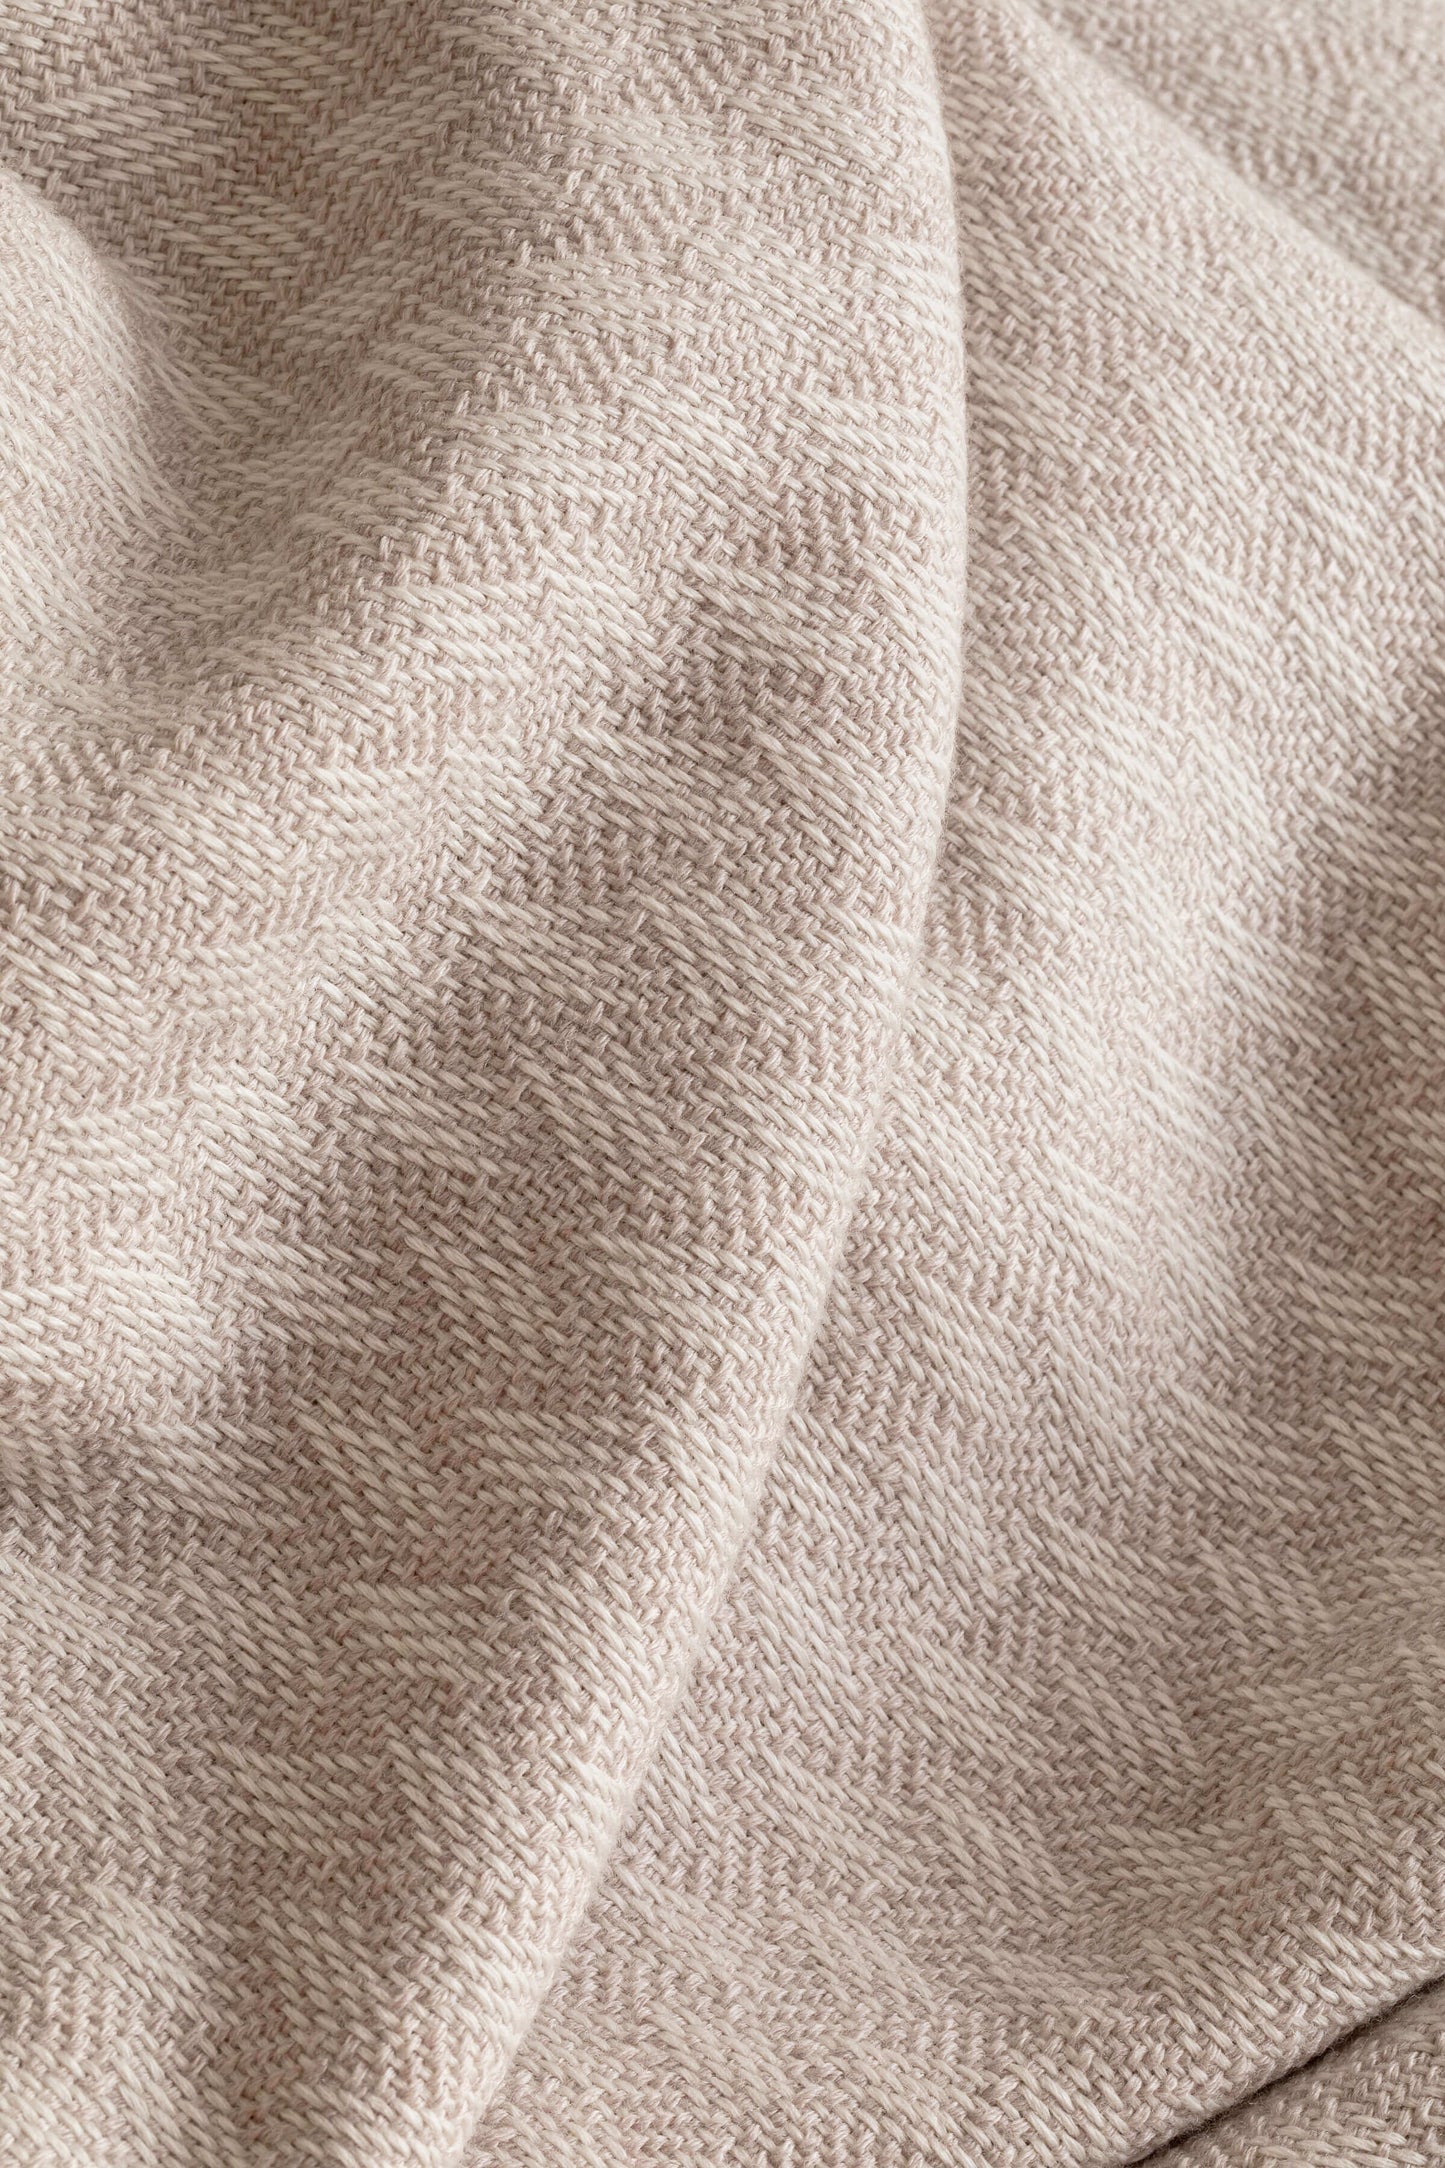 Johnstons of Elgin’s Lattice Weave Merino Bed Throw in Light Taupe & White WD001243RU7268ONE